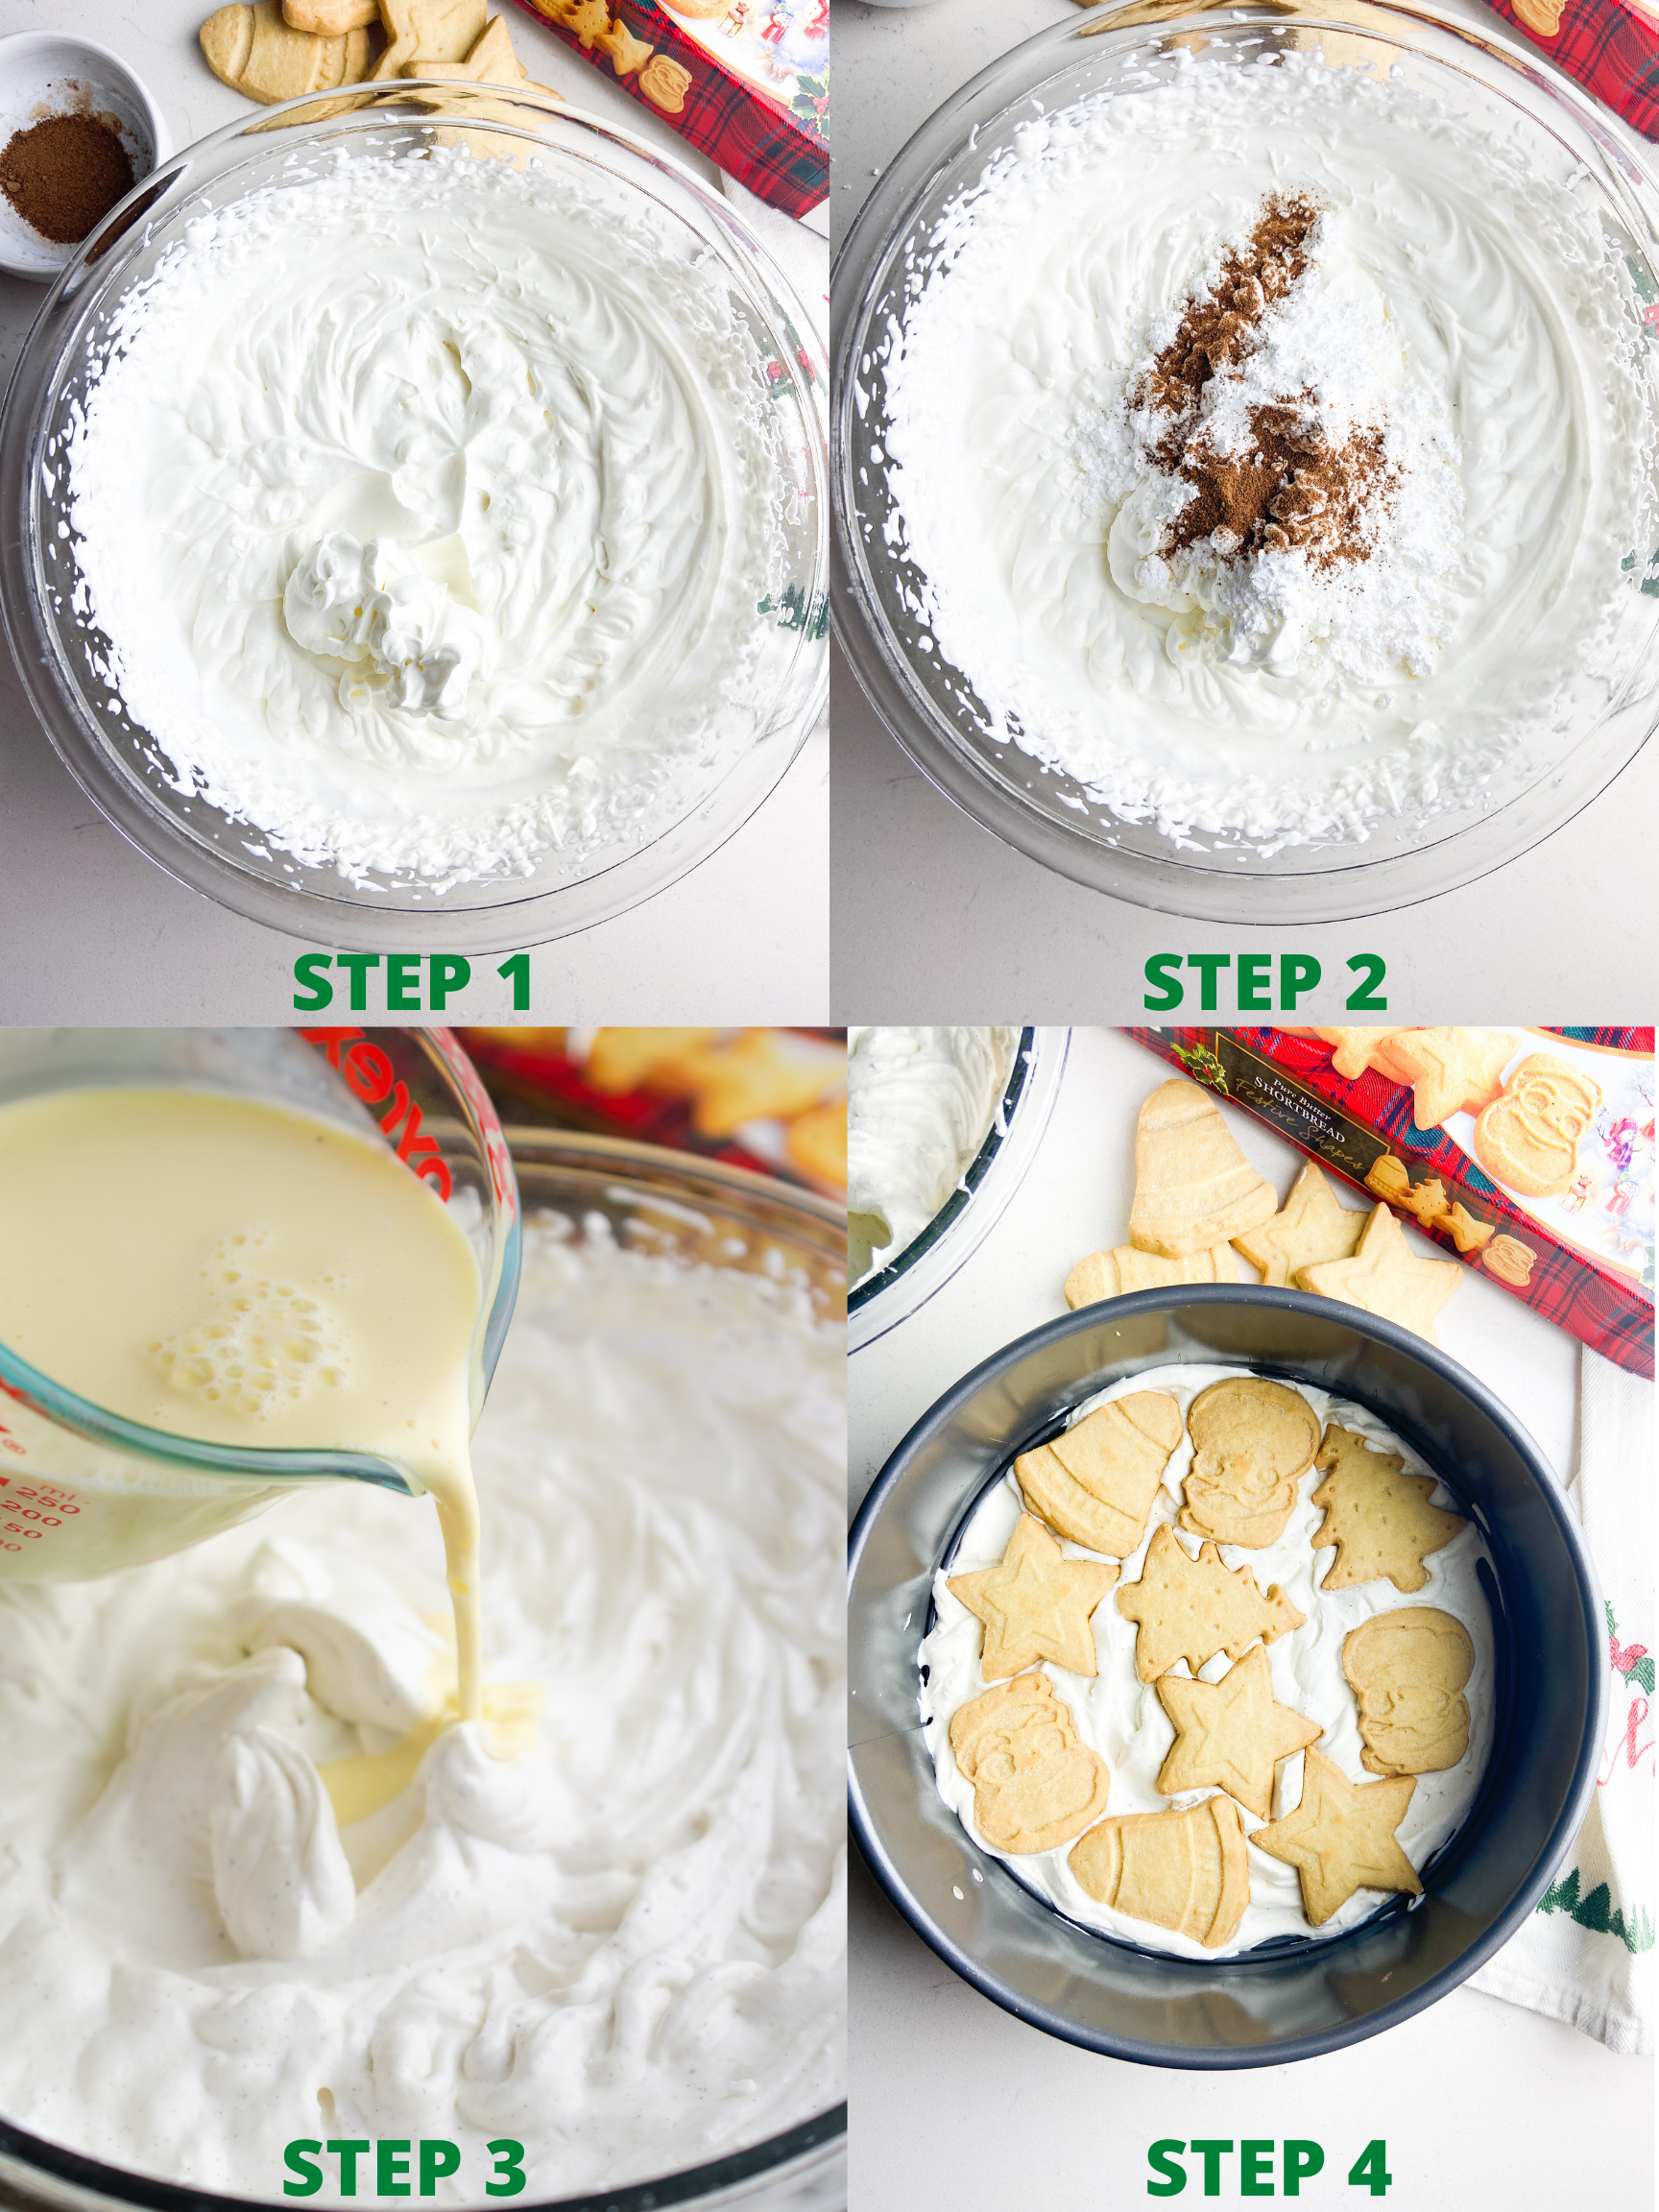 Step by step photos for icebox cake.